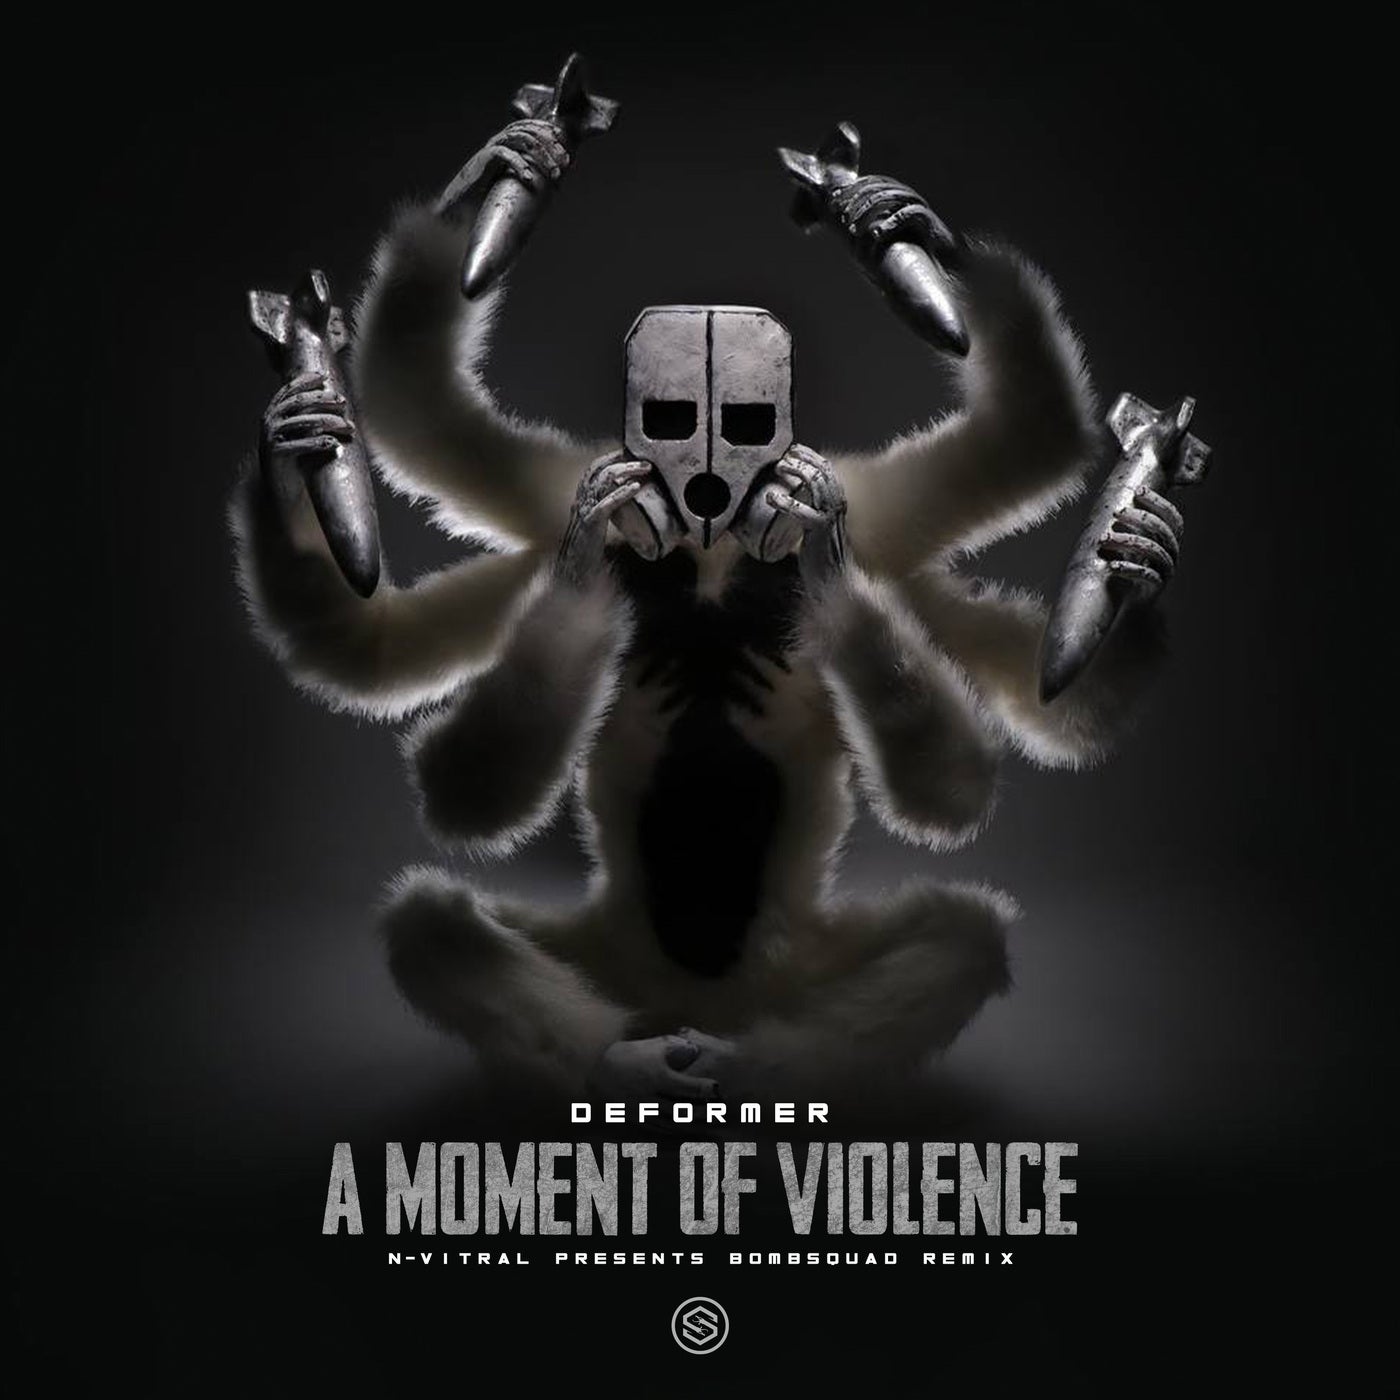 A Moment Of Violence - N-Vitral presents BOMBSQUAD Remix